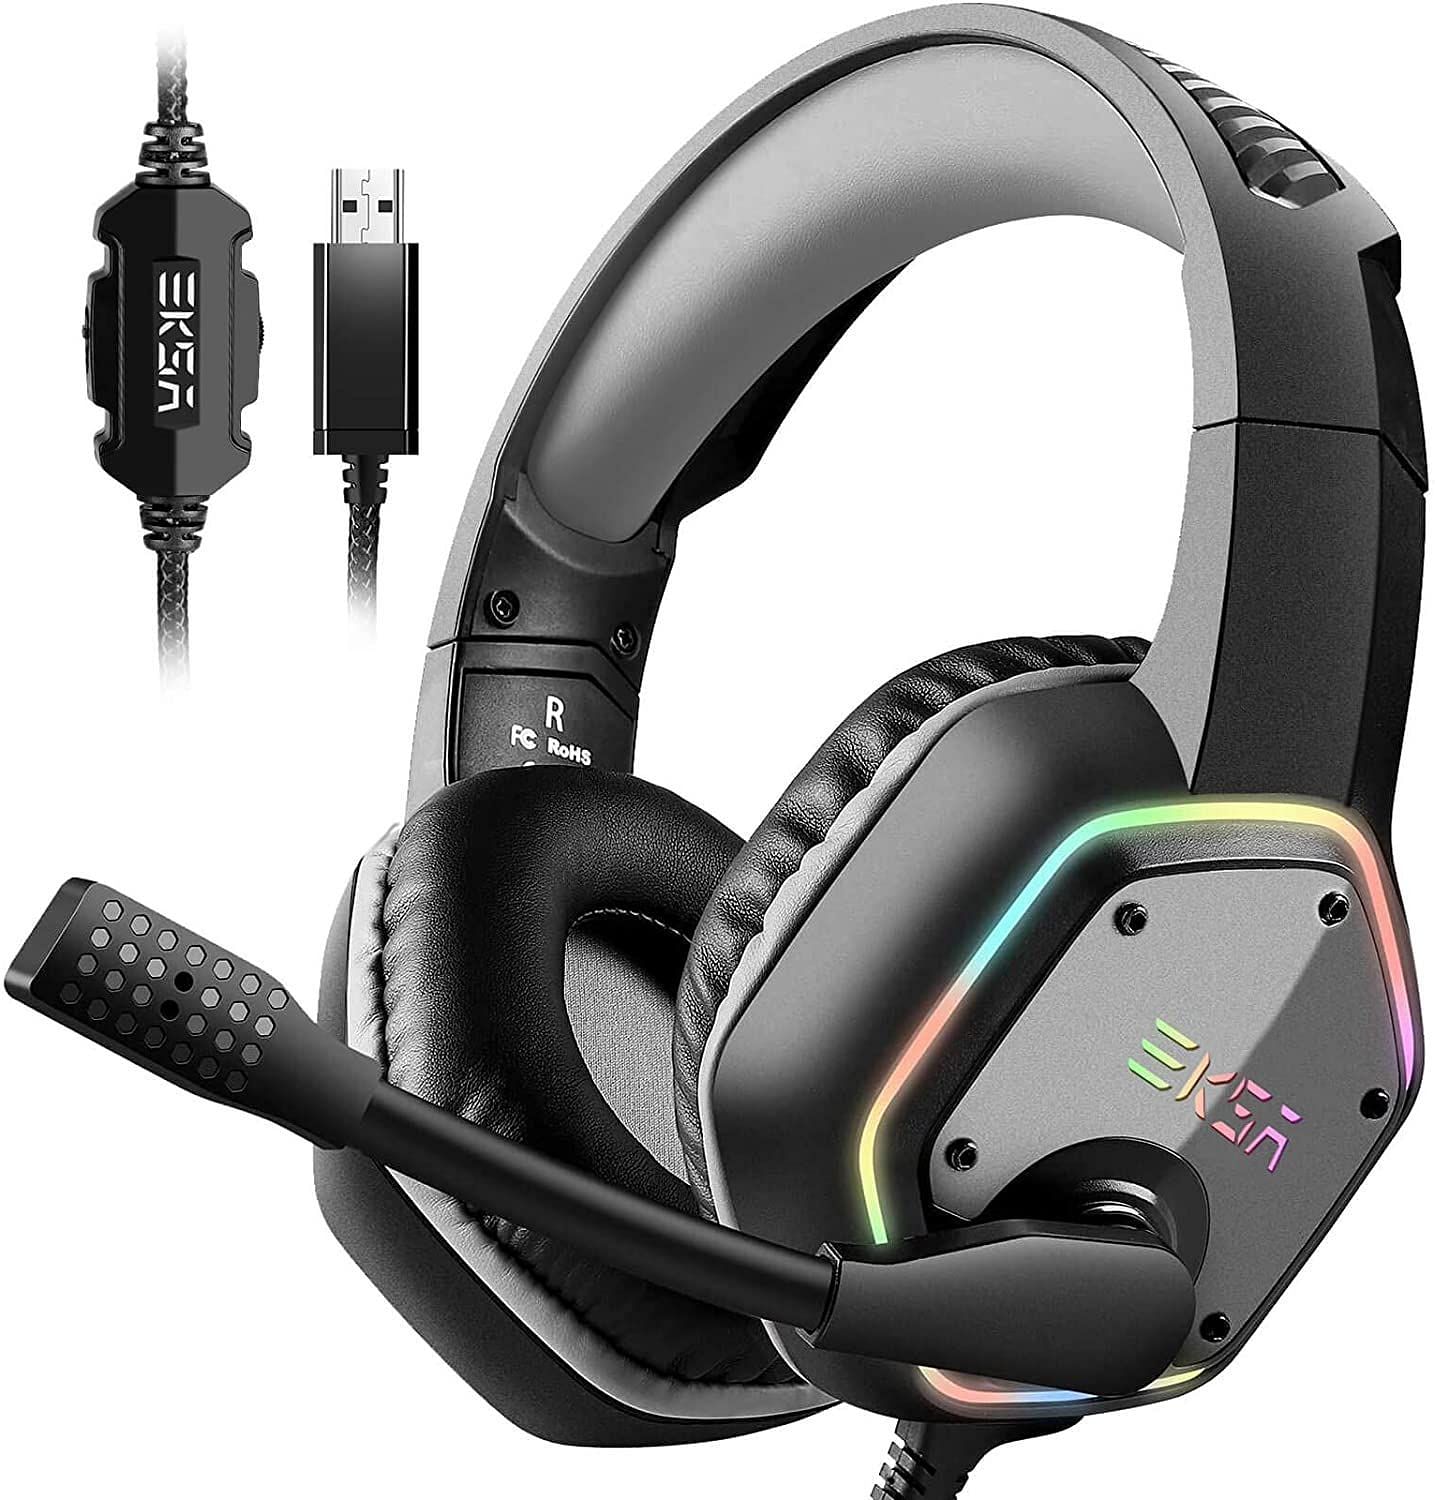 Best gaming headsets for CSGO under $100